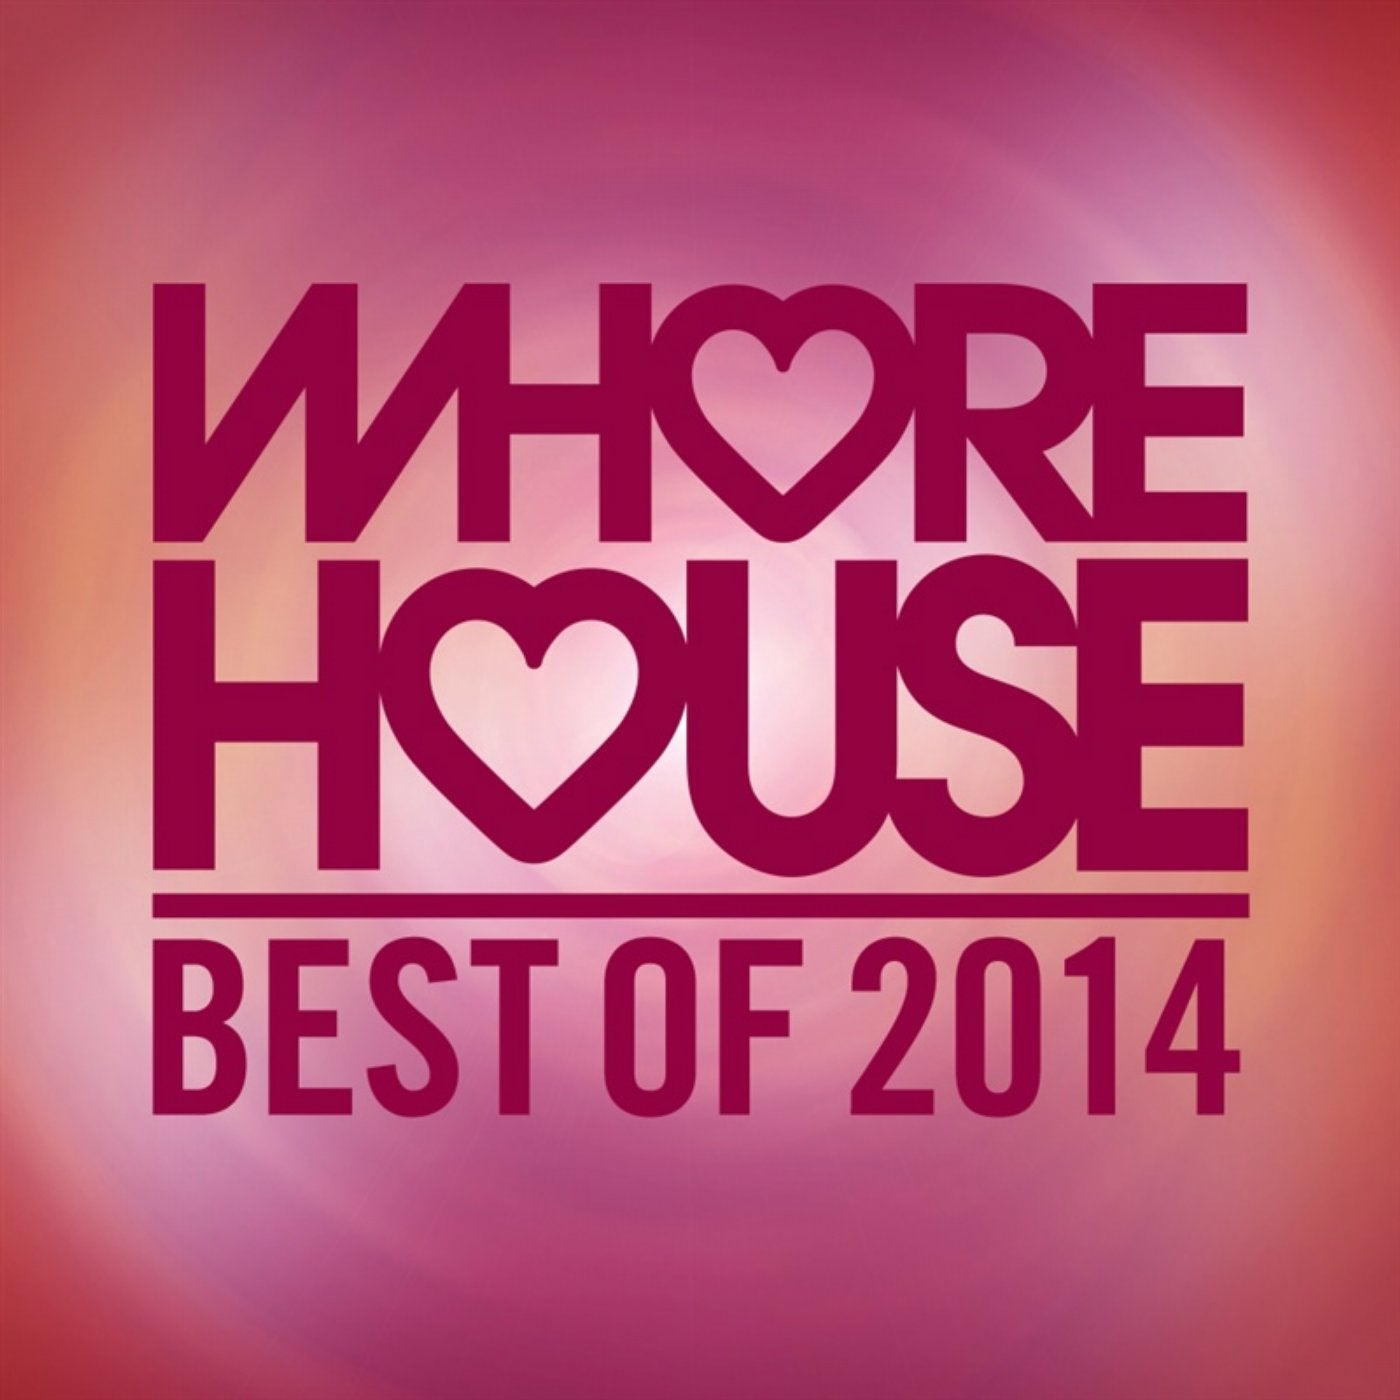 Best Of Whore House 2014